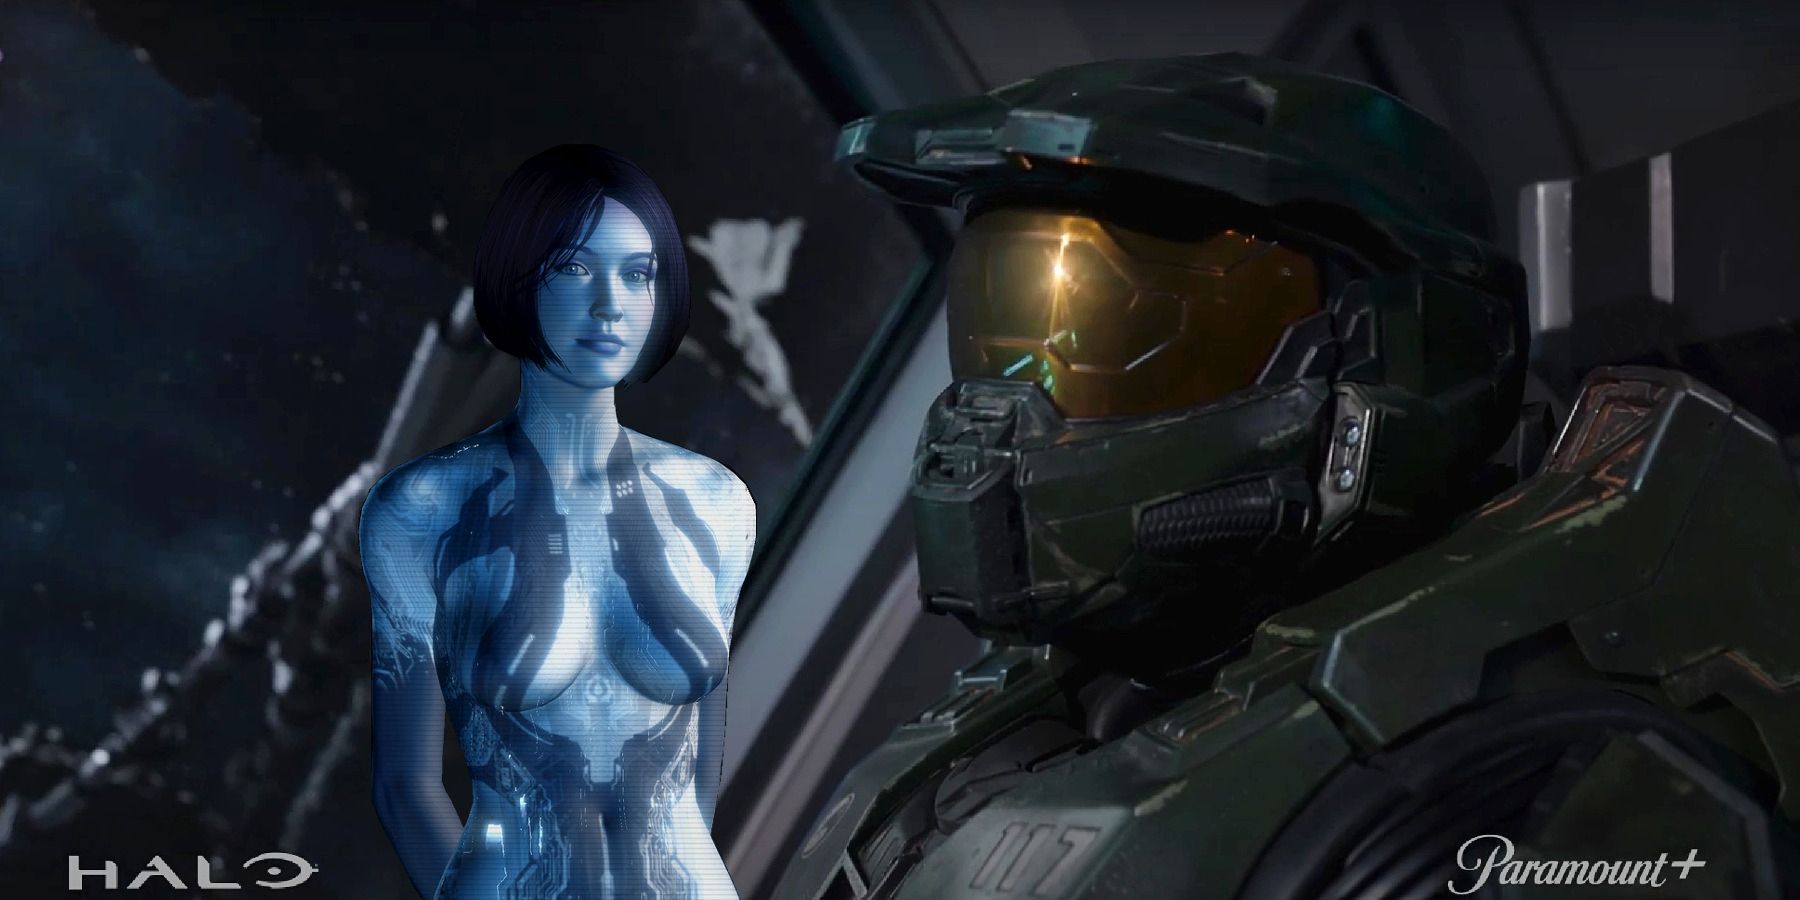 Halo series master chief with game Cortana